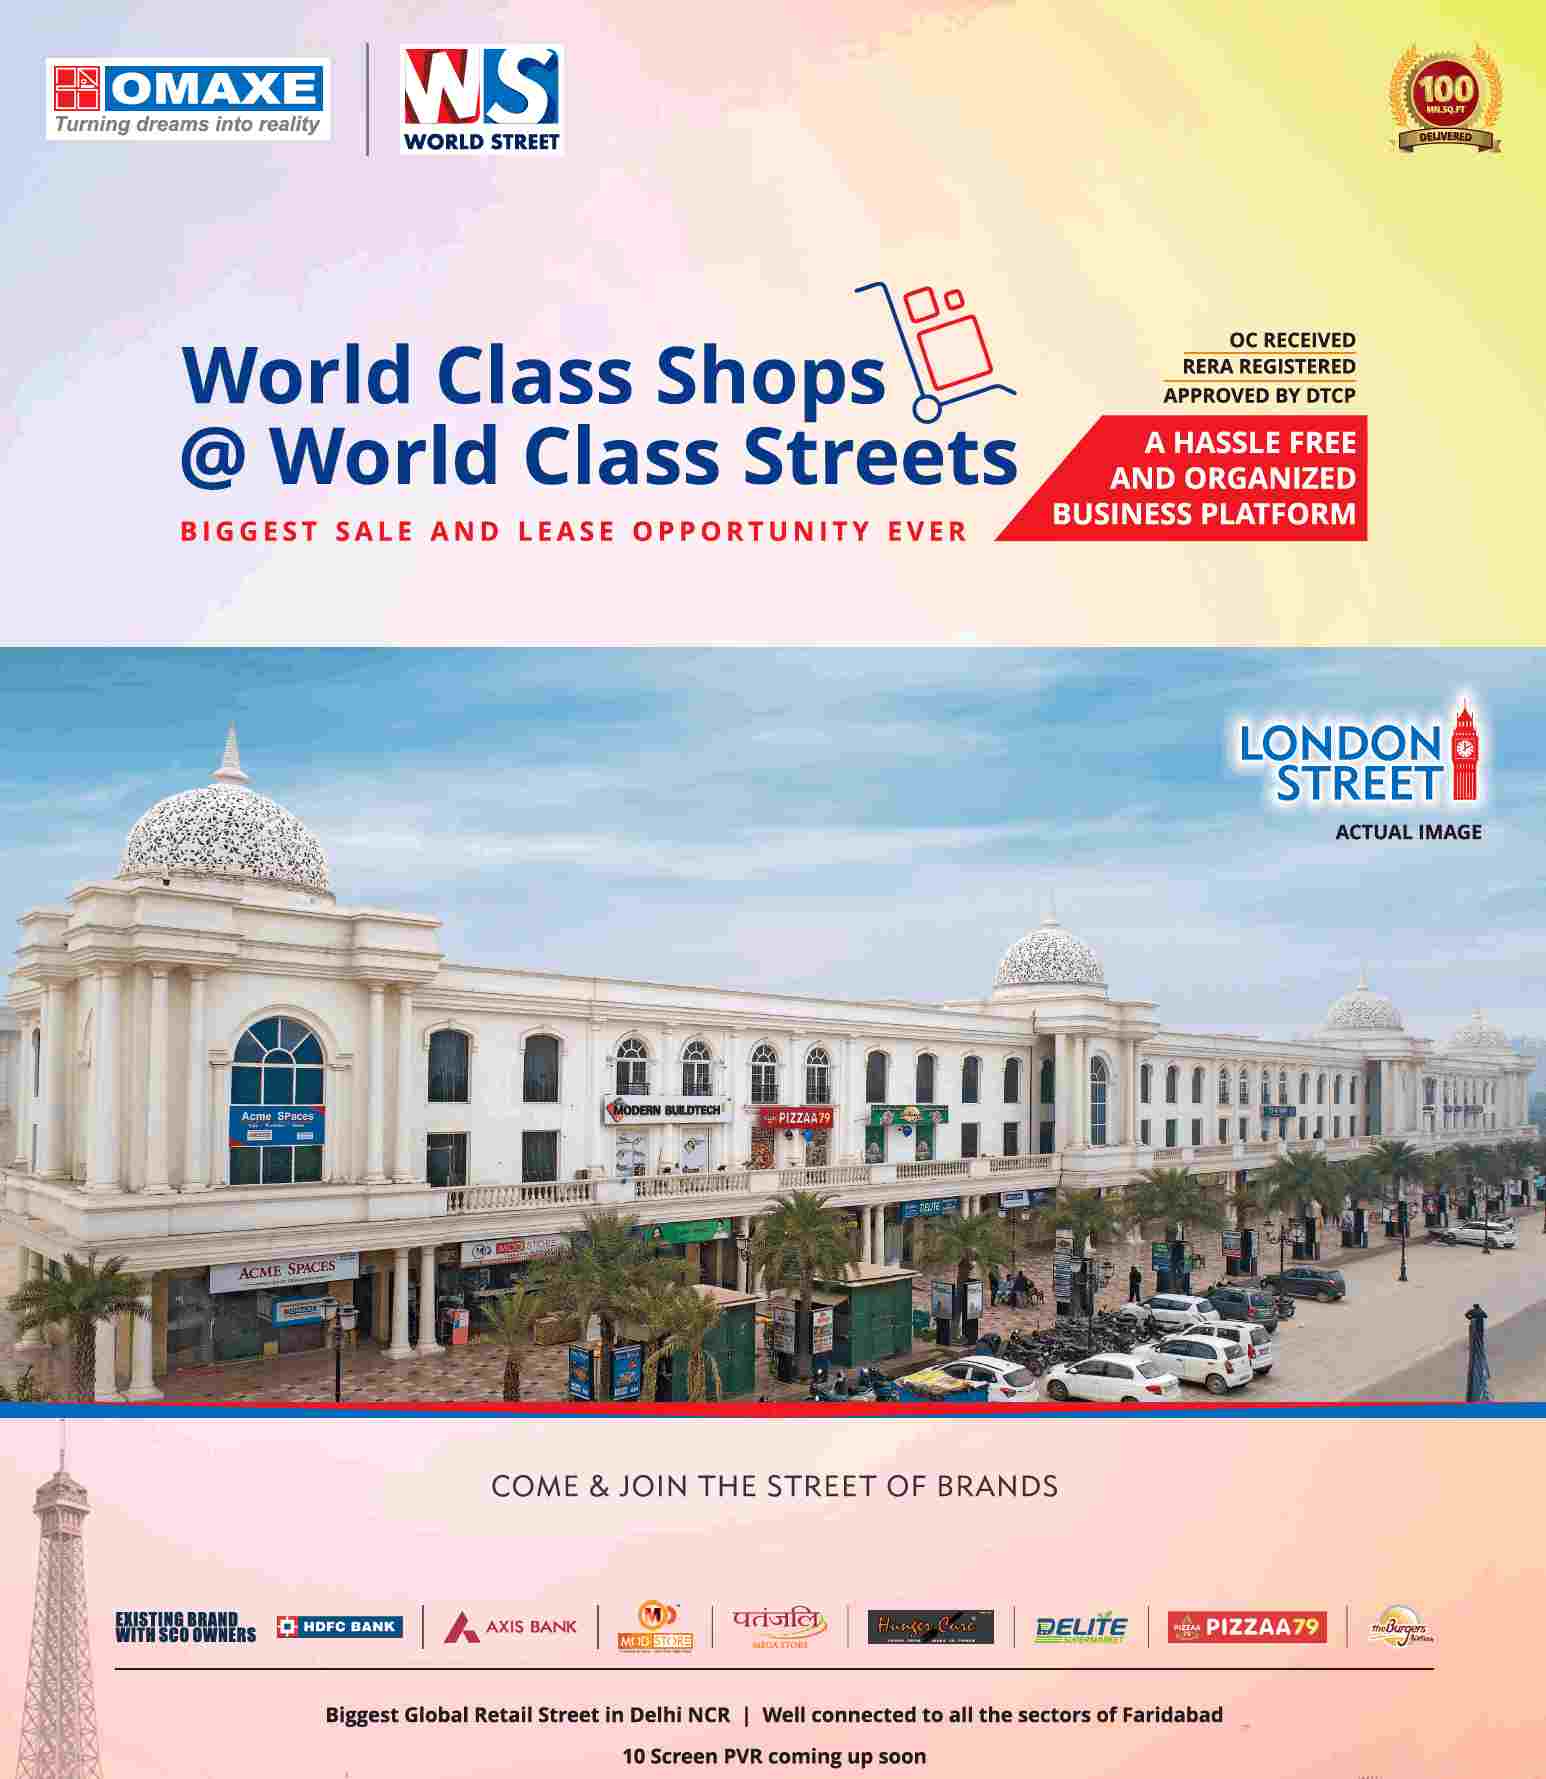 Come and join the street of brands at Omaxe World Street, Faridabad